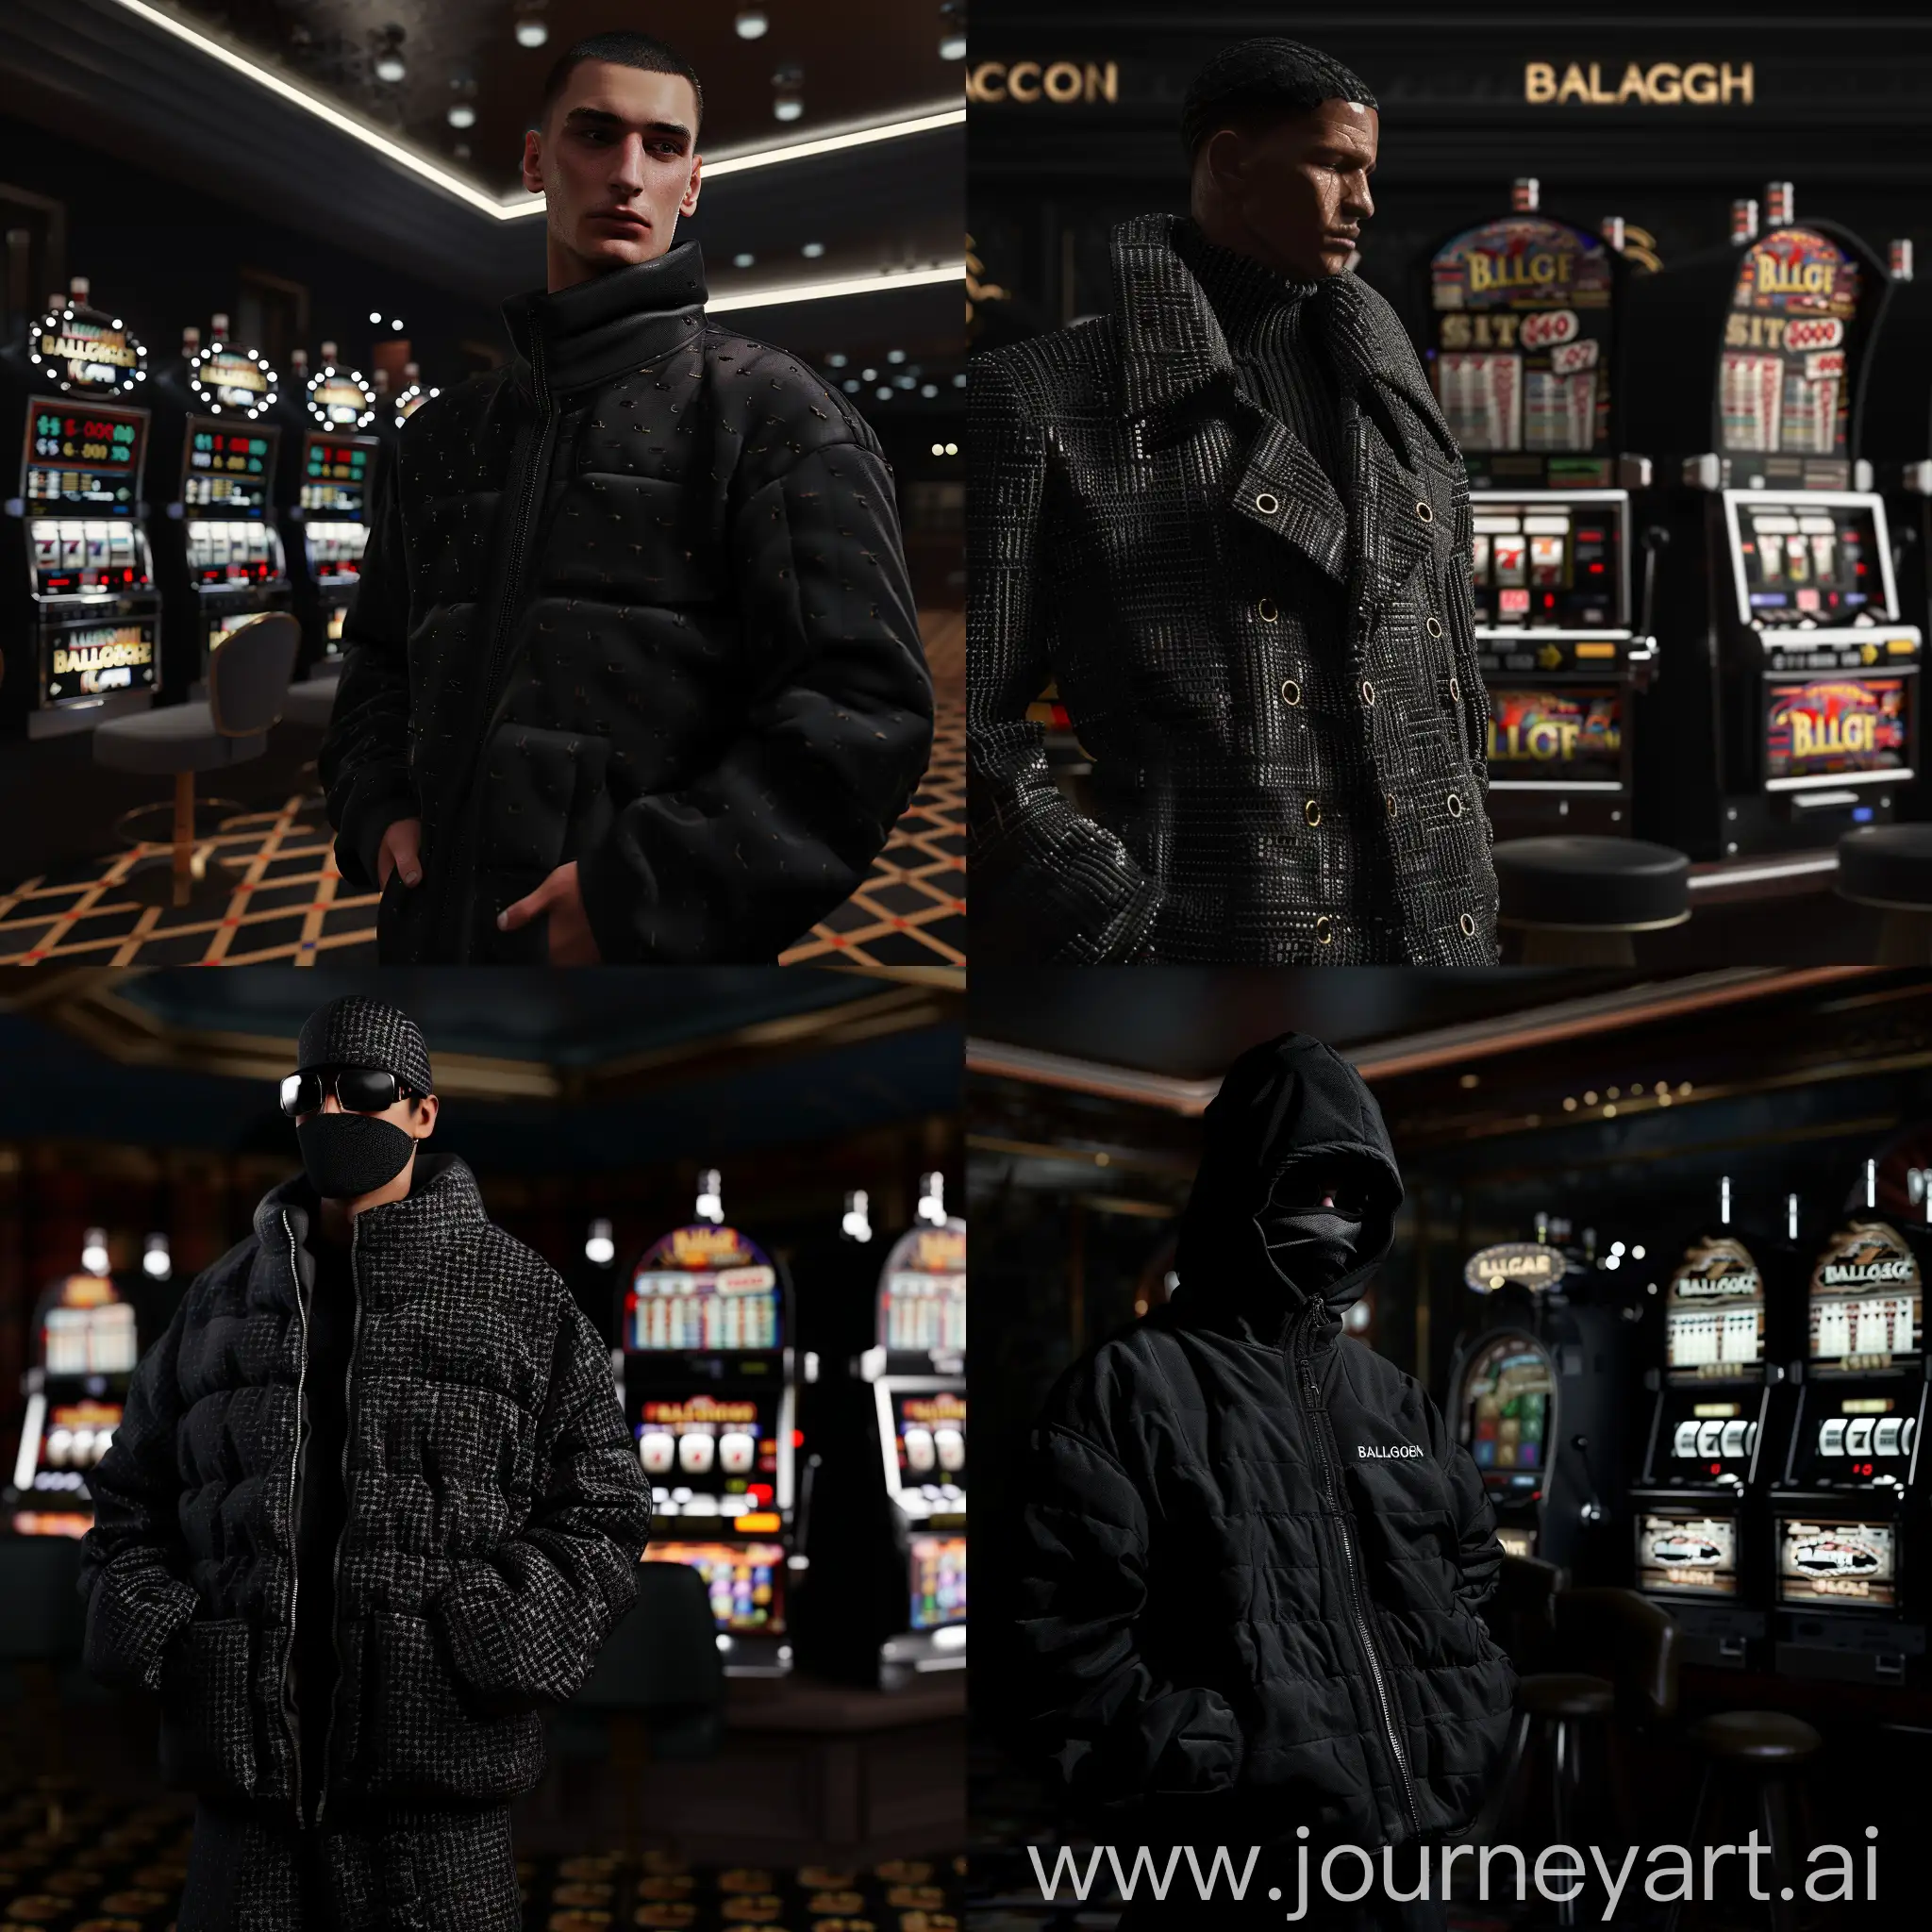 man dressed in the black balenciaga brand, and behind him dark room with slot machines from the casino. 4k super hd, realistic, cinematic.